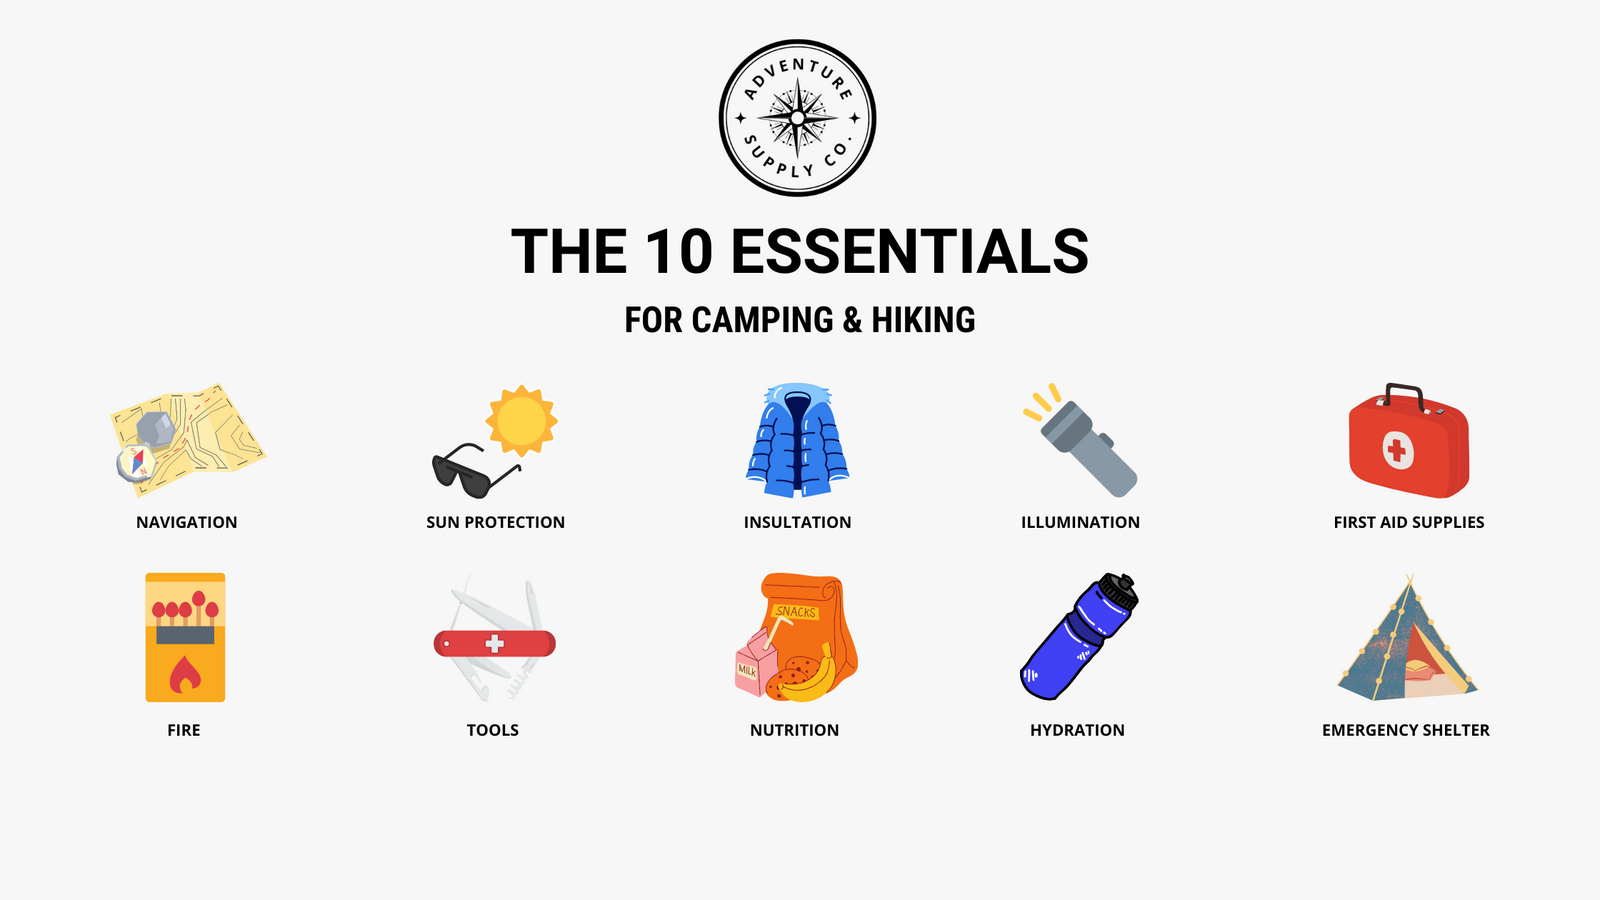 The "10 Essentials" to Bring Camping & Hiking